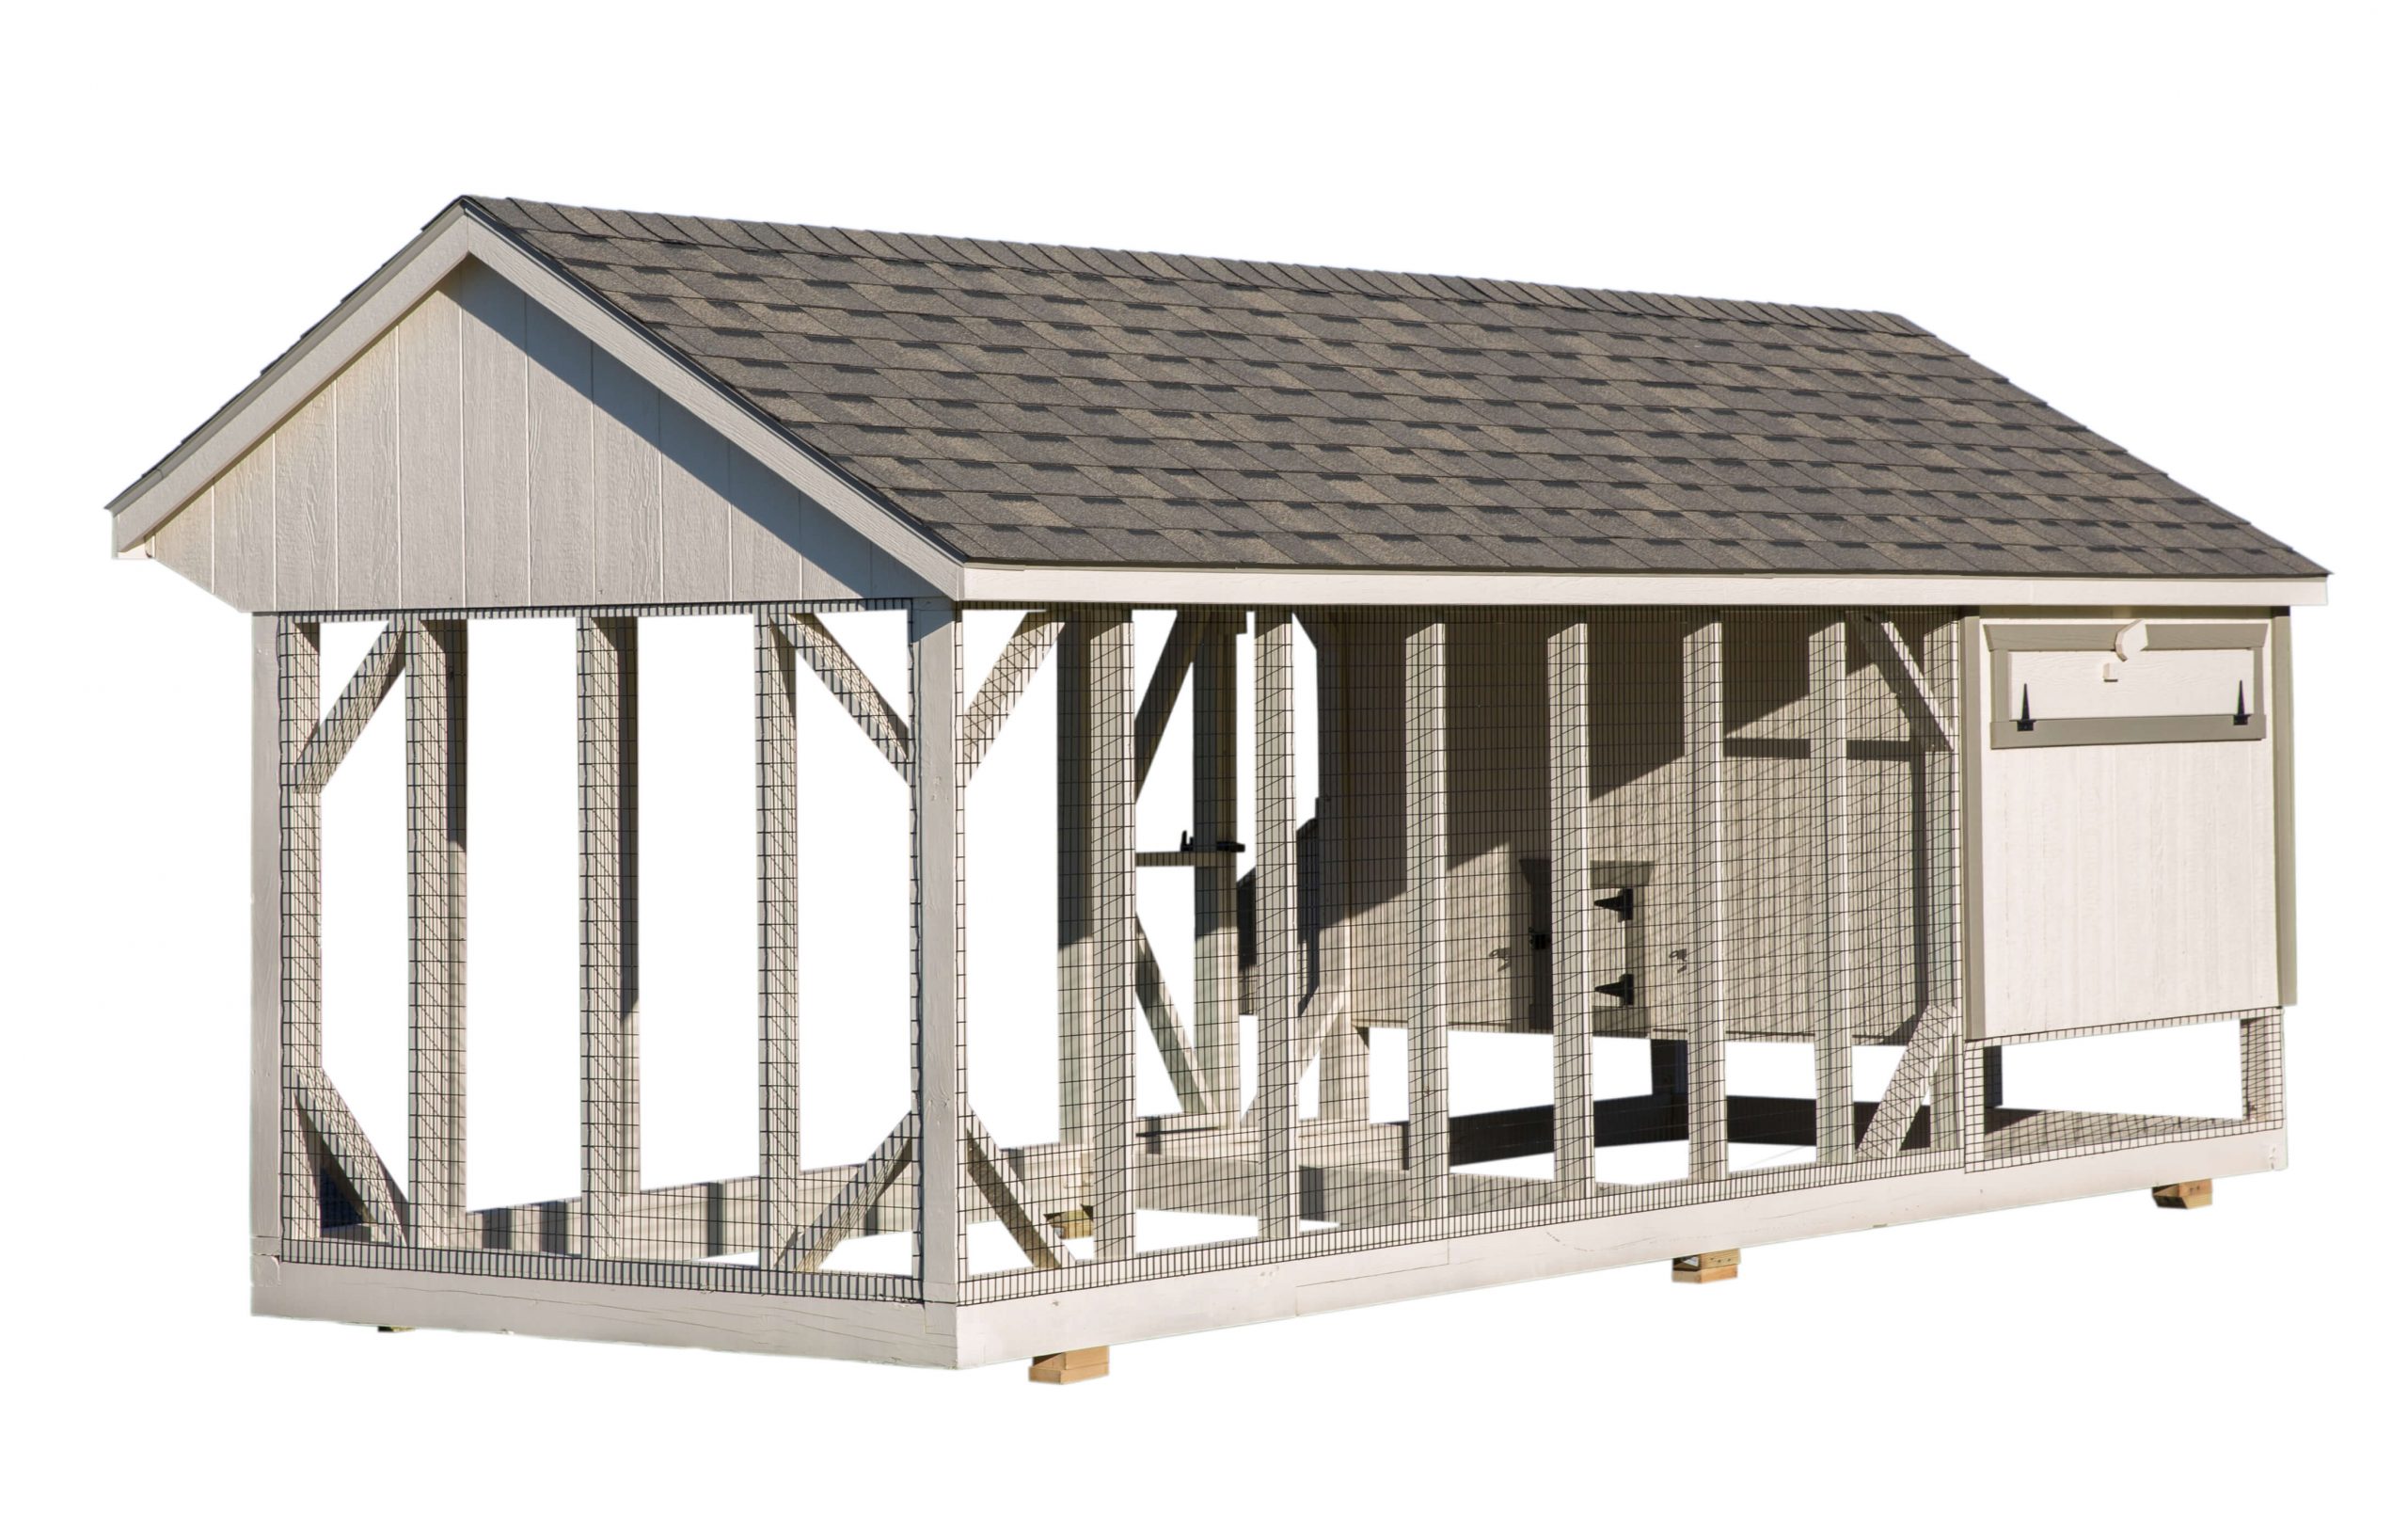 Exterior back view of a 7x20 Quaker Combination chicken coop with cupola